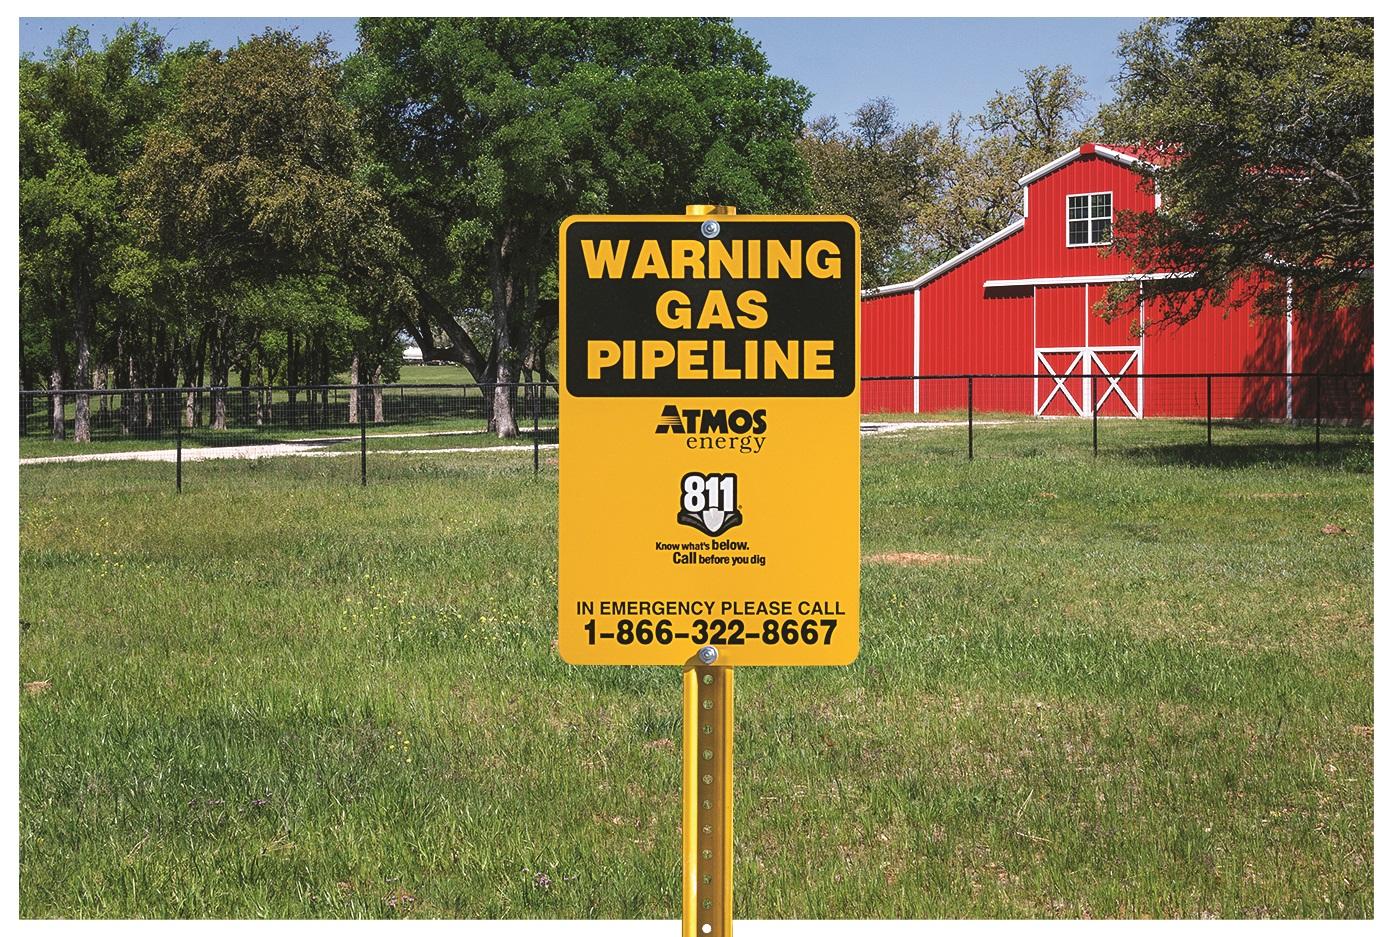 Image of a warning sign, "Warning Gas Pipeline"